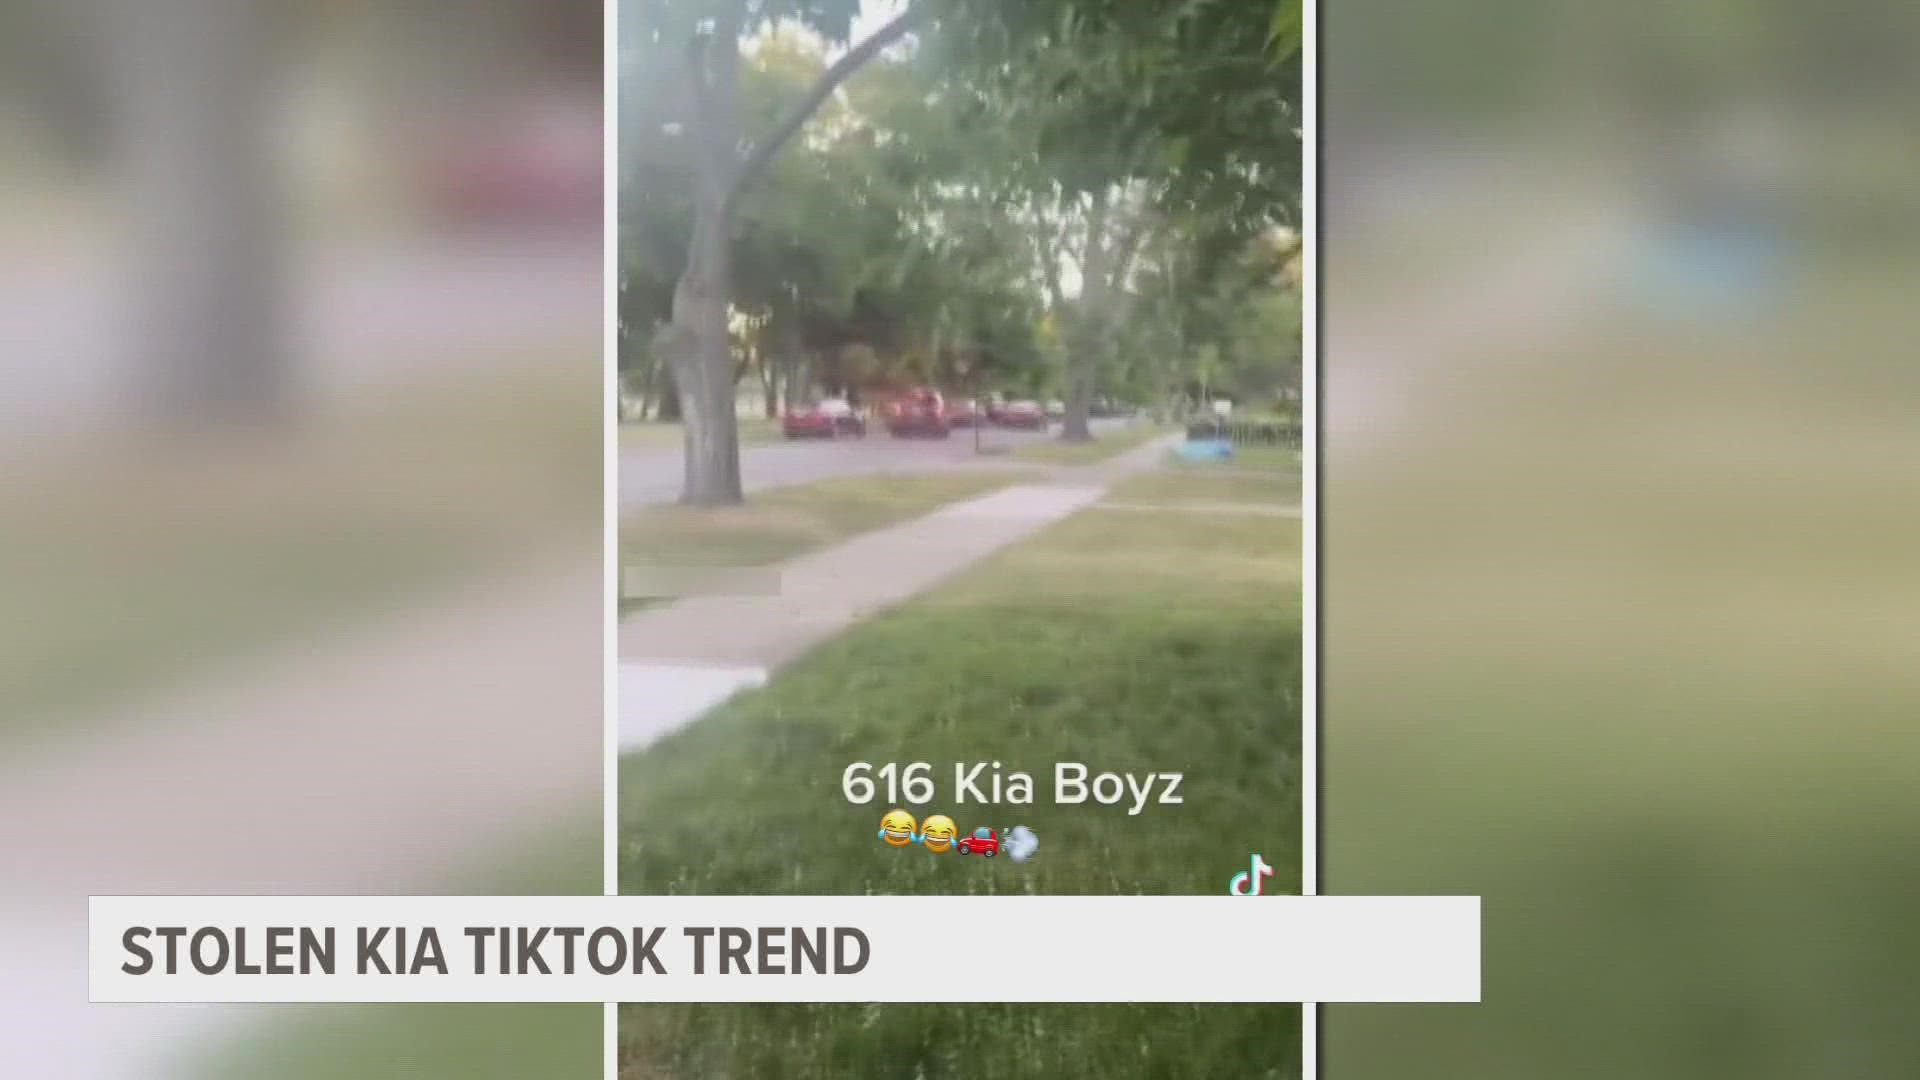 The Kia Boys have stolen up to four cars a day as they target West Michigan communities as part of a national trend.